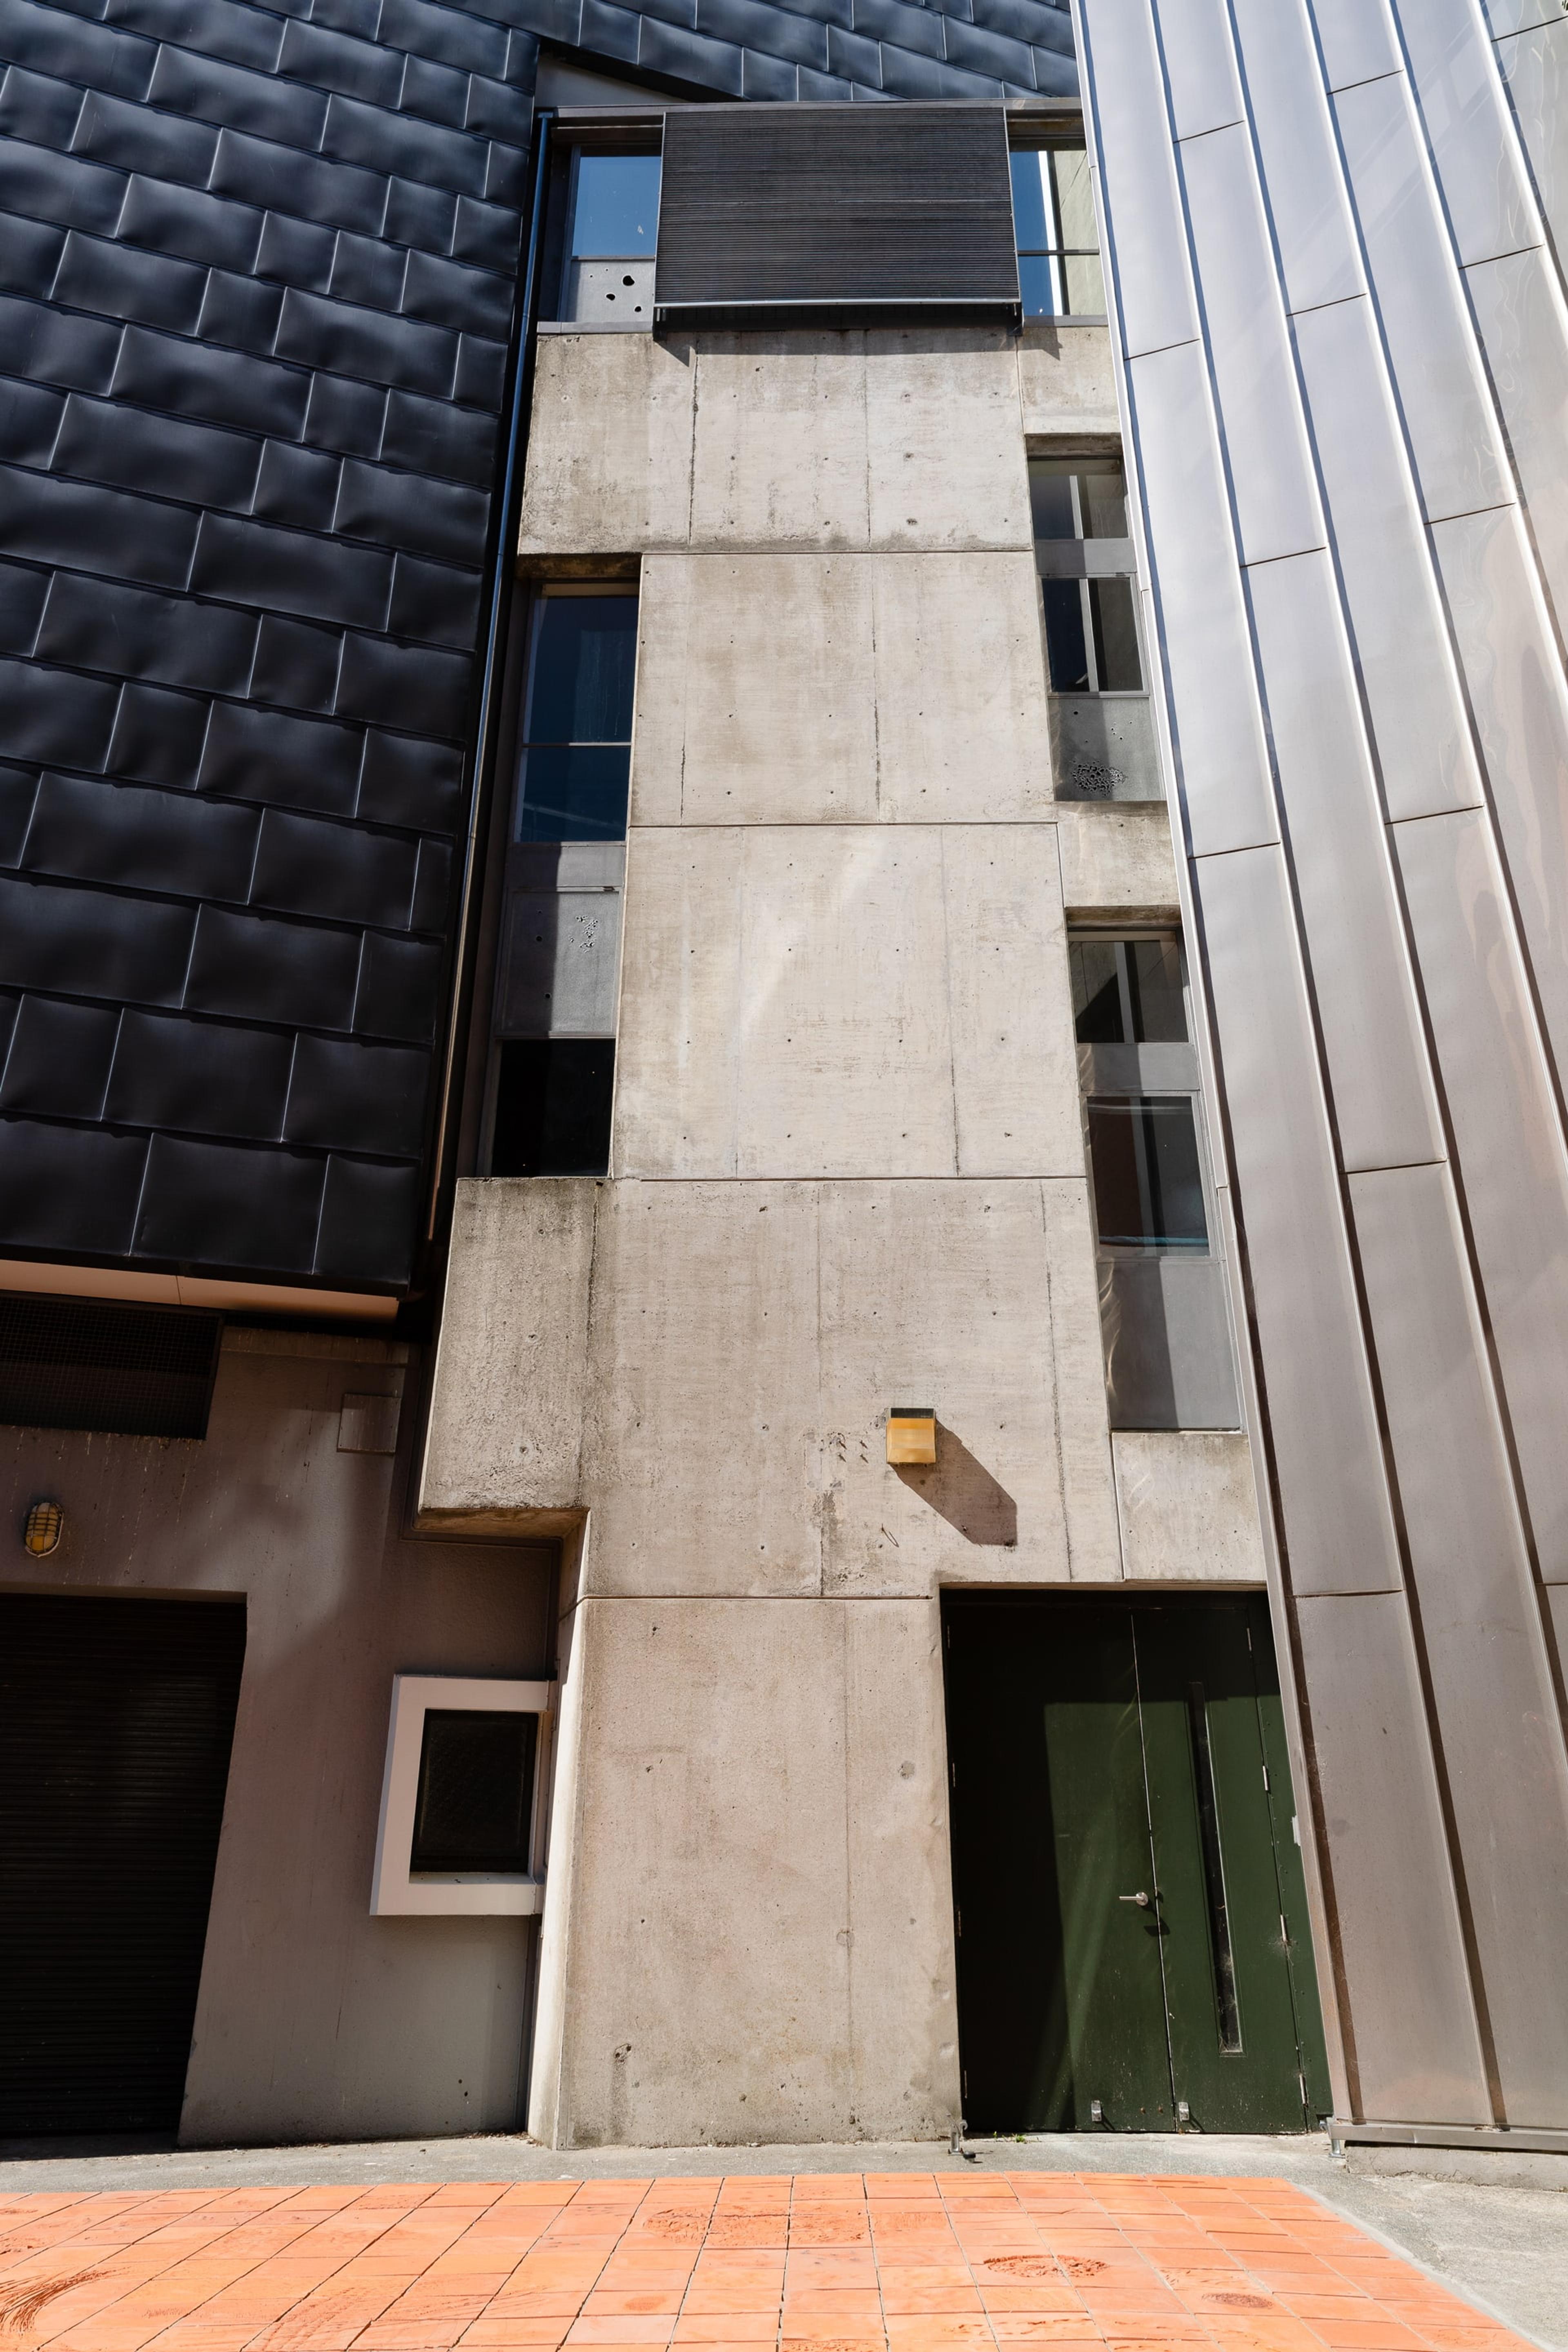 photograph of a flat area of terracotta tiles next to a tall grey concrete building